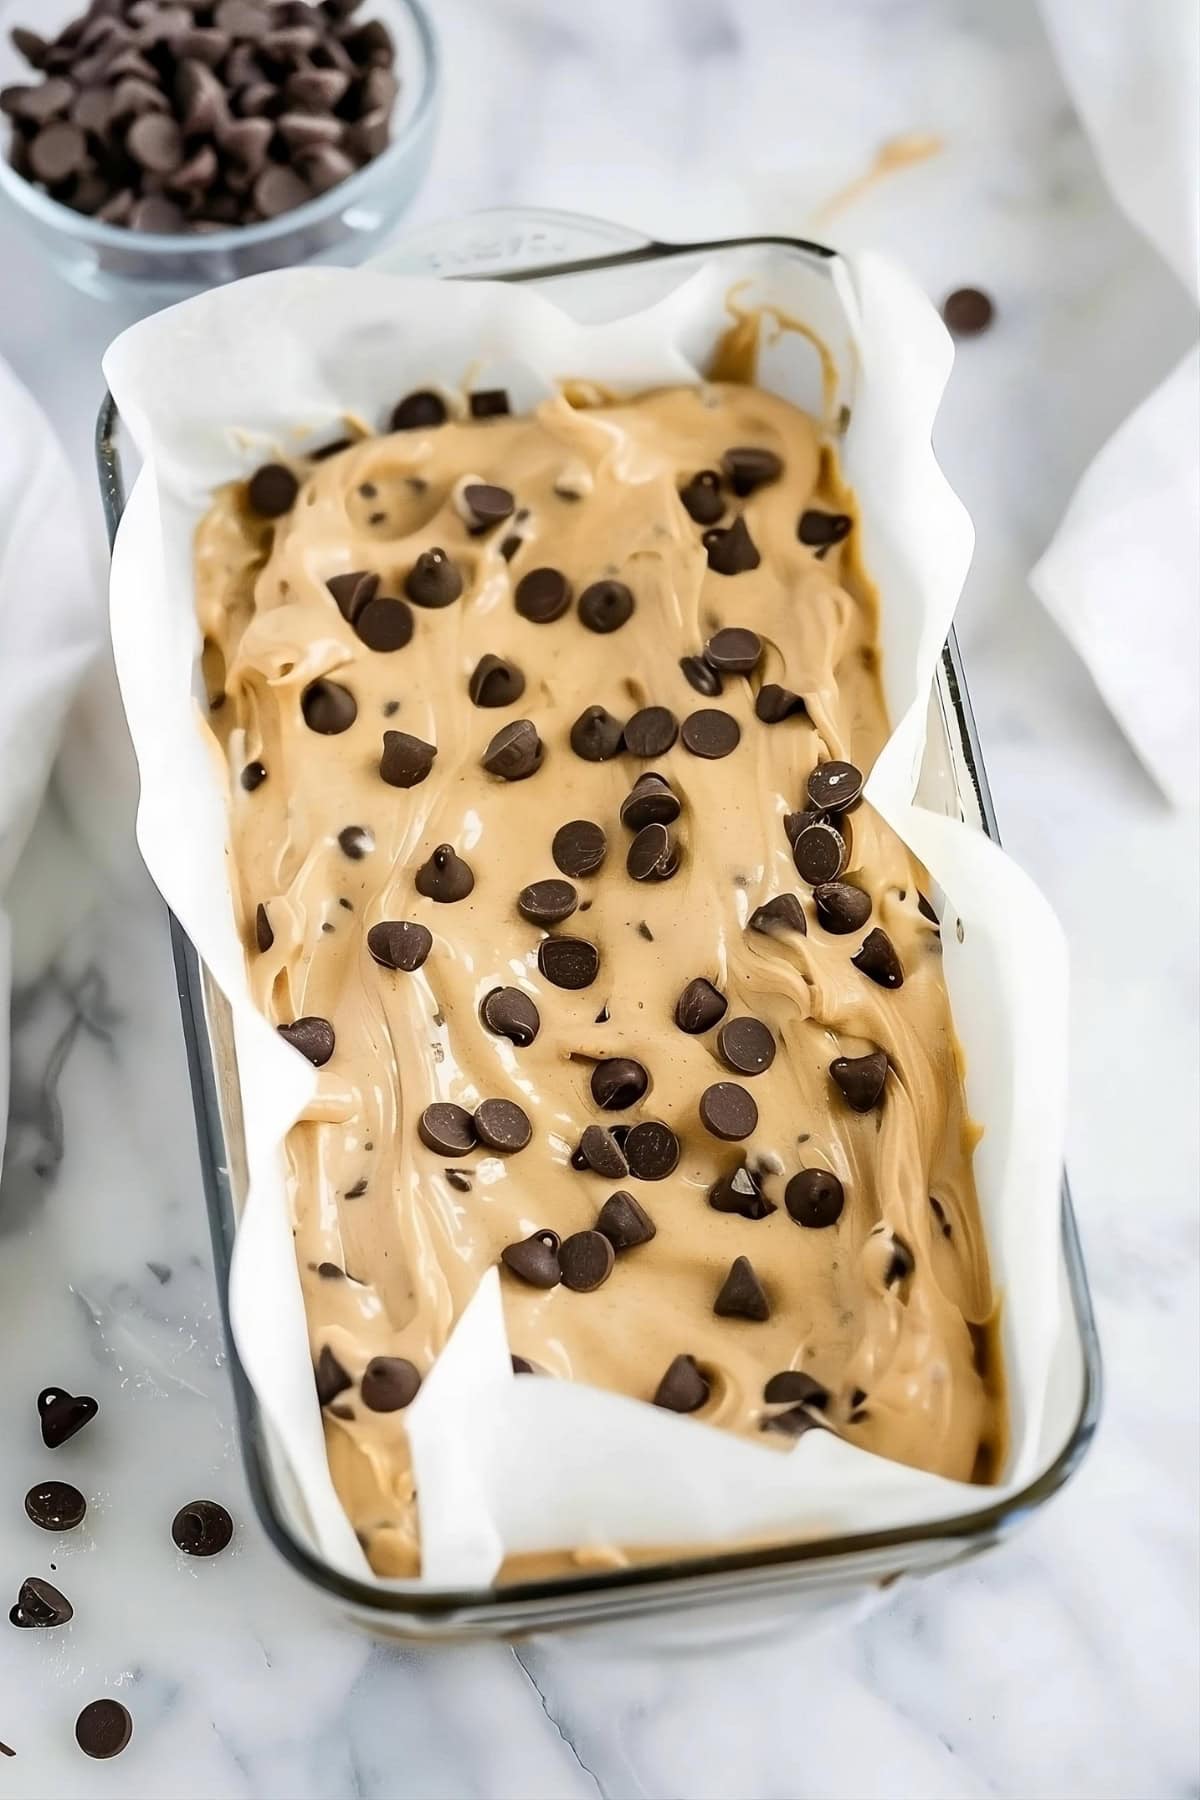 Banana and peanut butter bread batter mix in a loaf pan with chocolate chips on top, top down view.